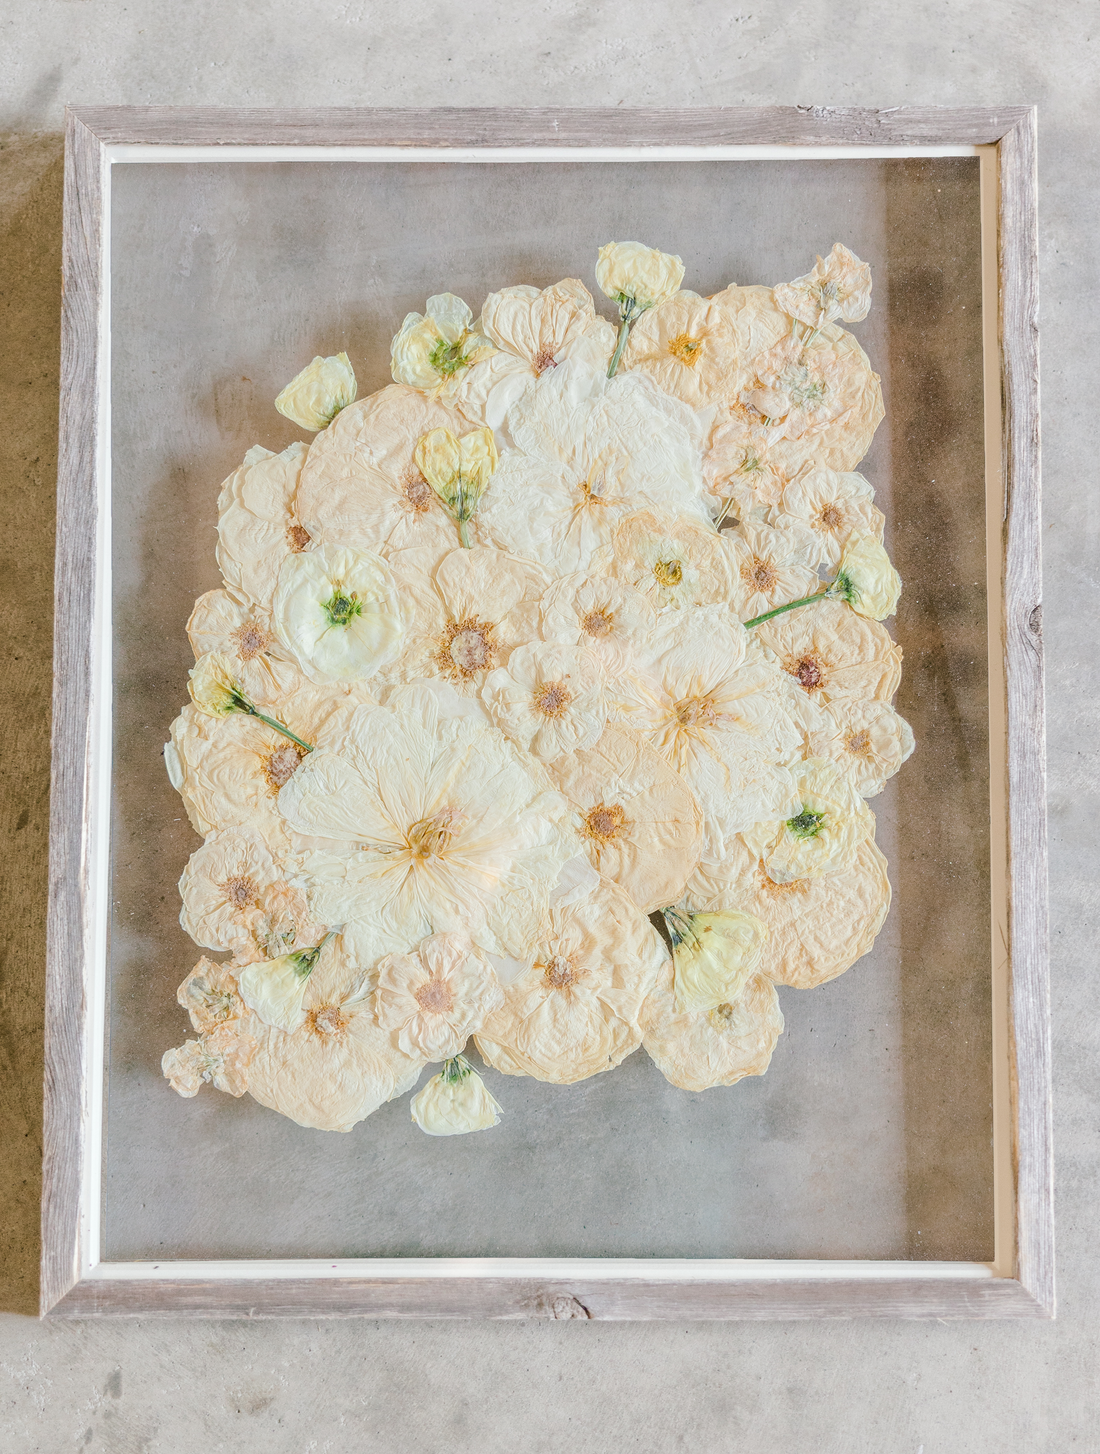 An all white ball bouquet pressed and preserved into a barn wood frame against concrete.